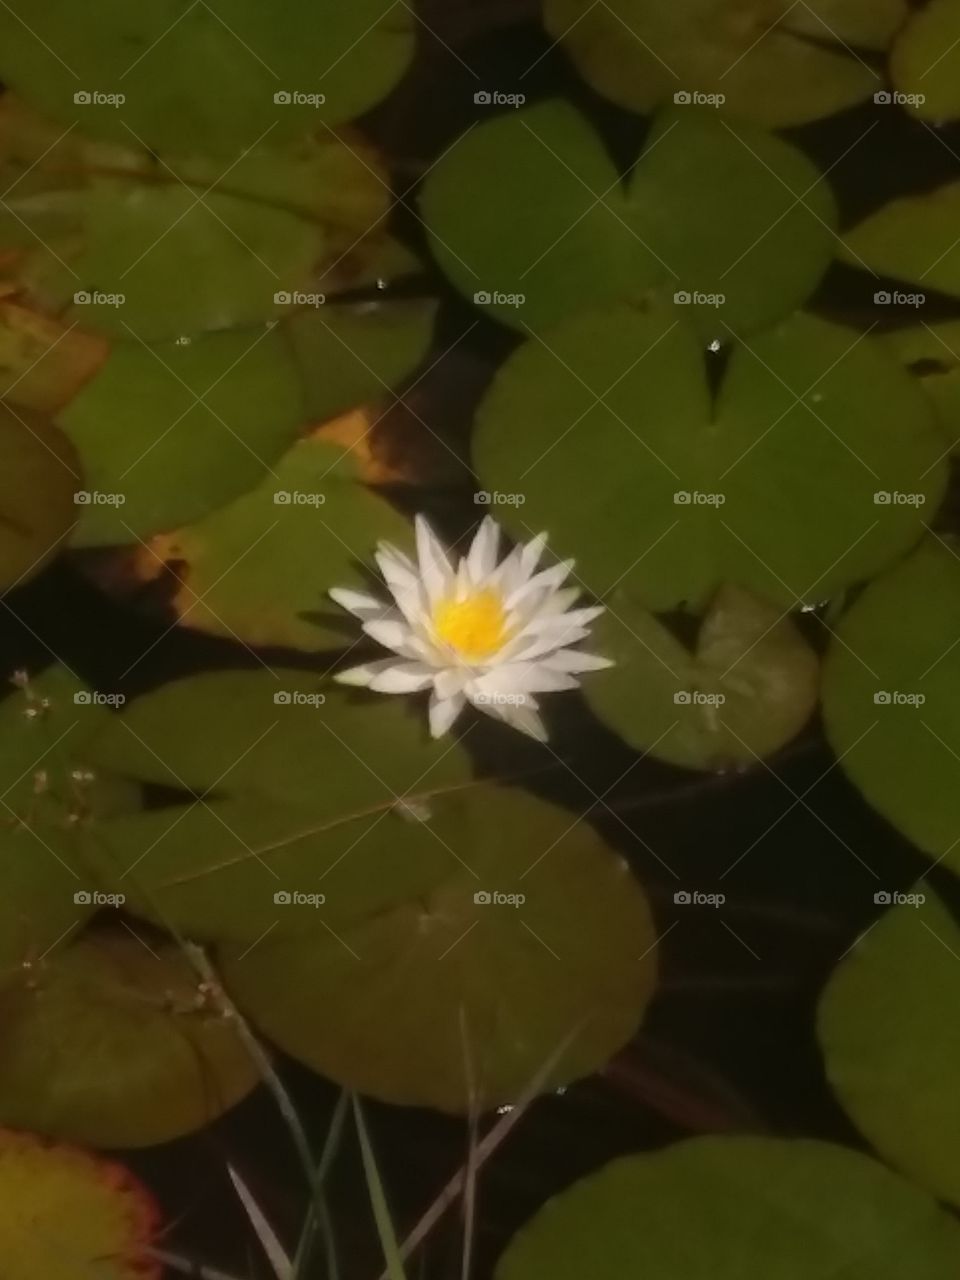 Blossomed American white water-lily (Nymphaea odorata)